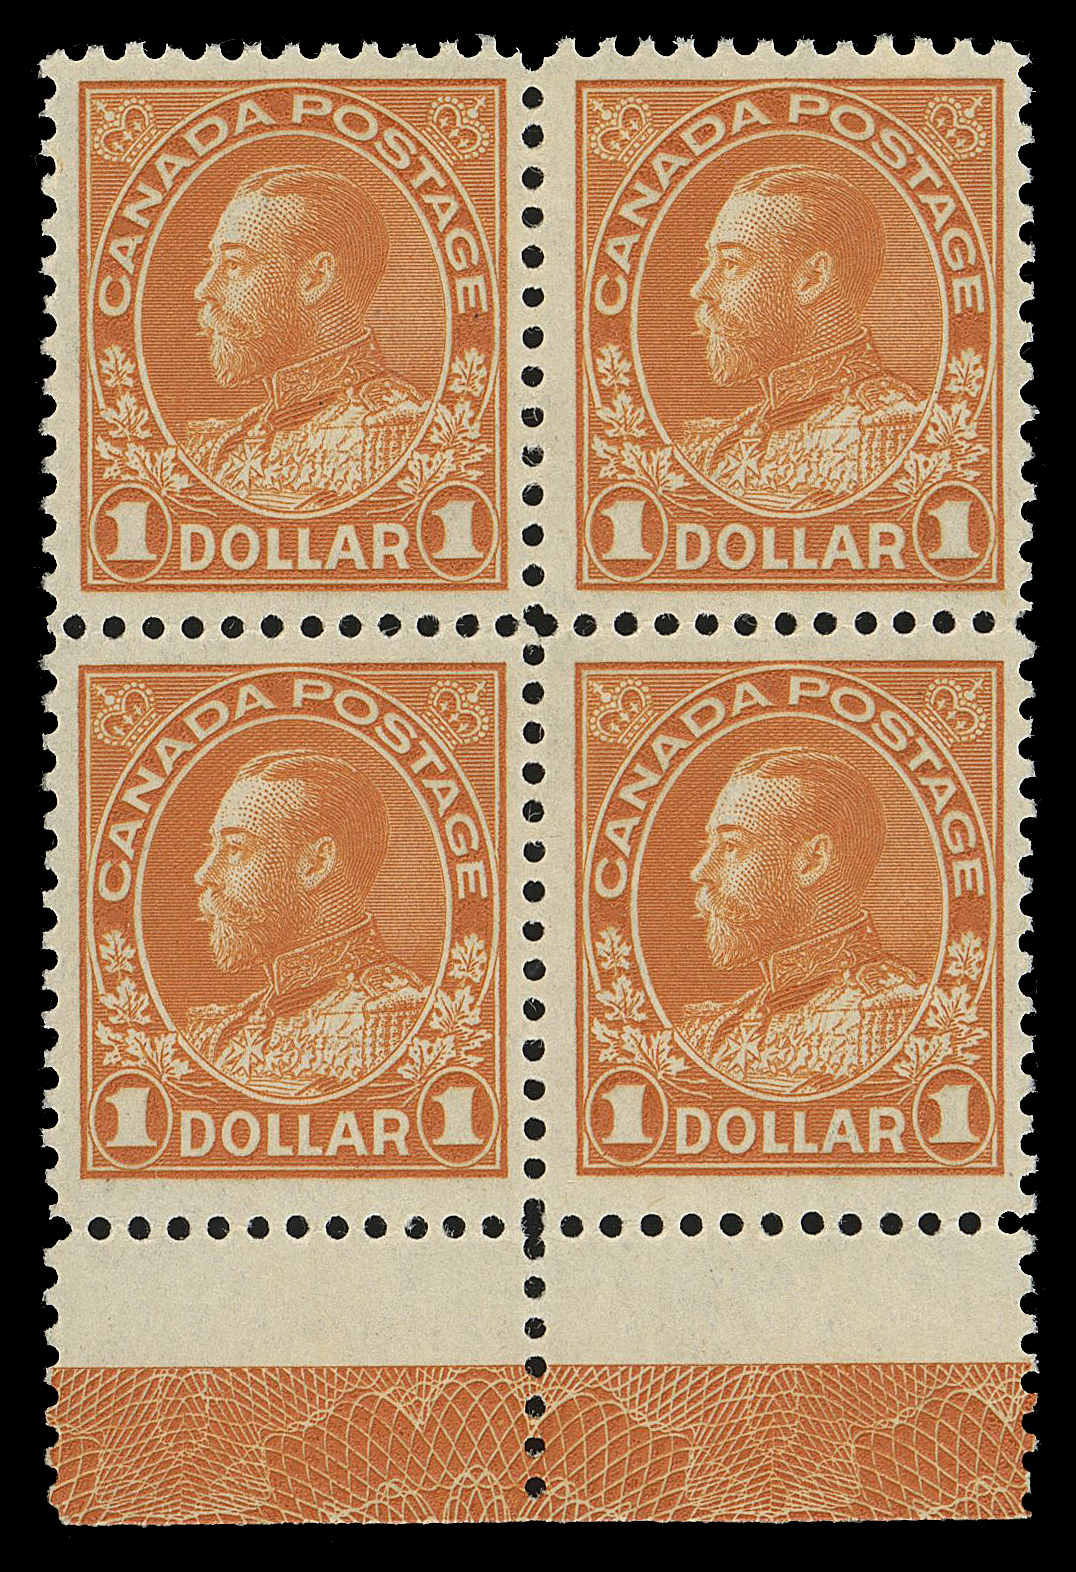 ADMIRAL STAMPS  122,An attractive mint block with superb, full strength Type D lathework, LH on top pair, lower pair and lathework margin NH, F-VF (Unitrade cat. as two NH lathework singles)